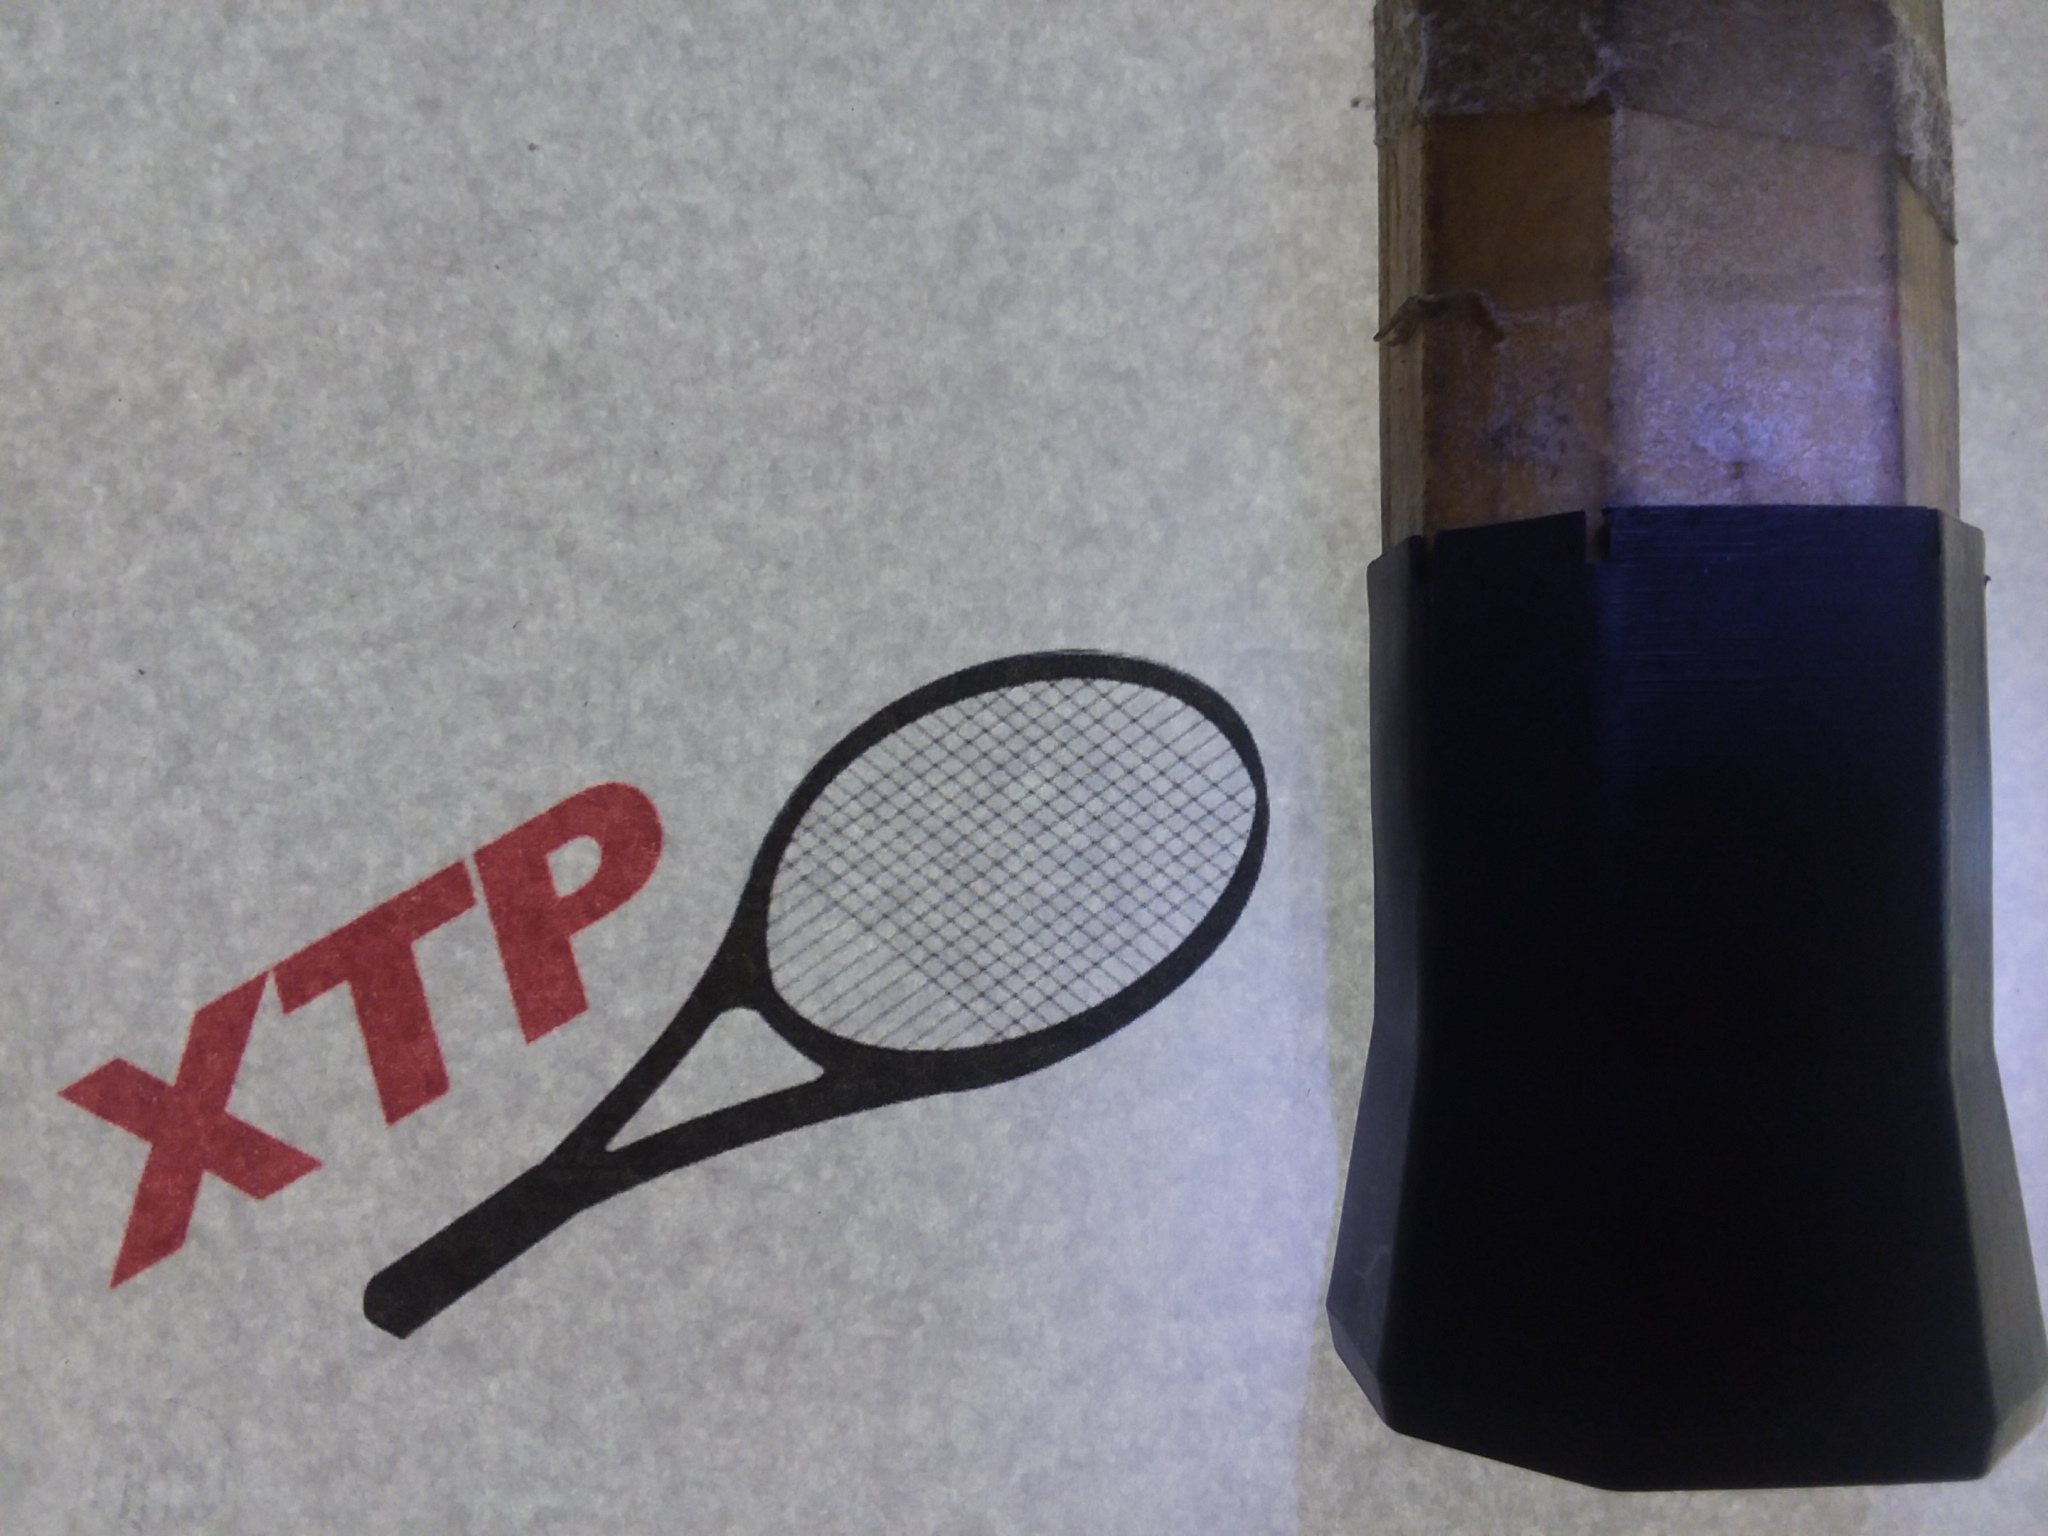 XTP Xtended Tennis Product-With HeatFit Tech.all sizes in stock